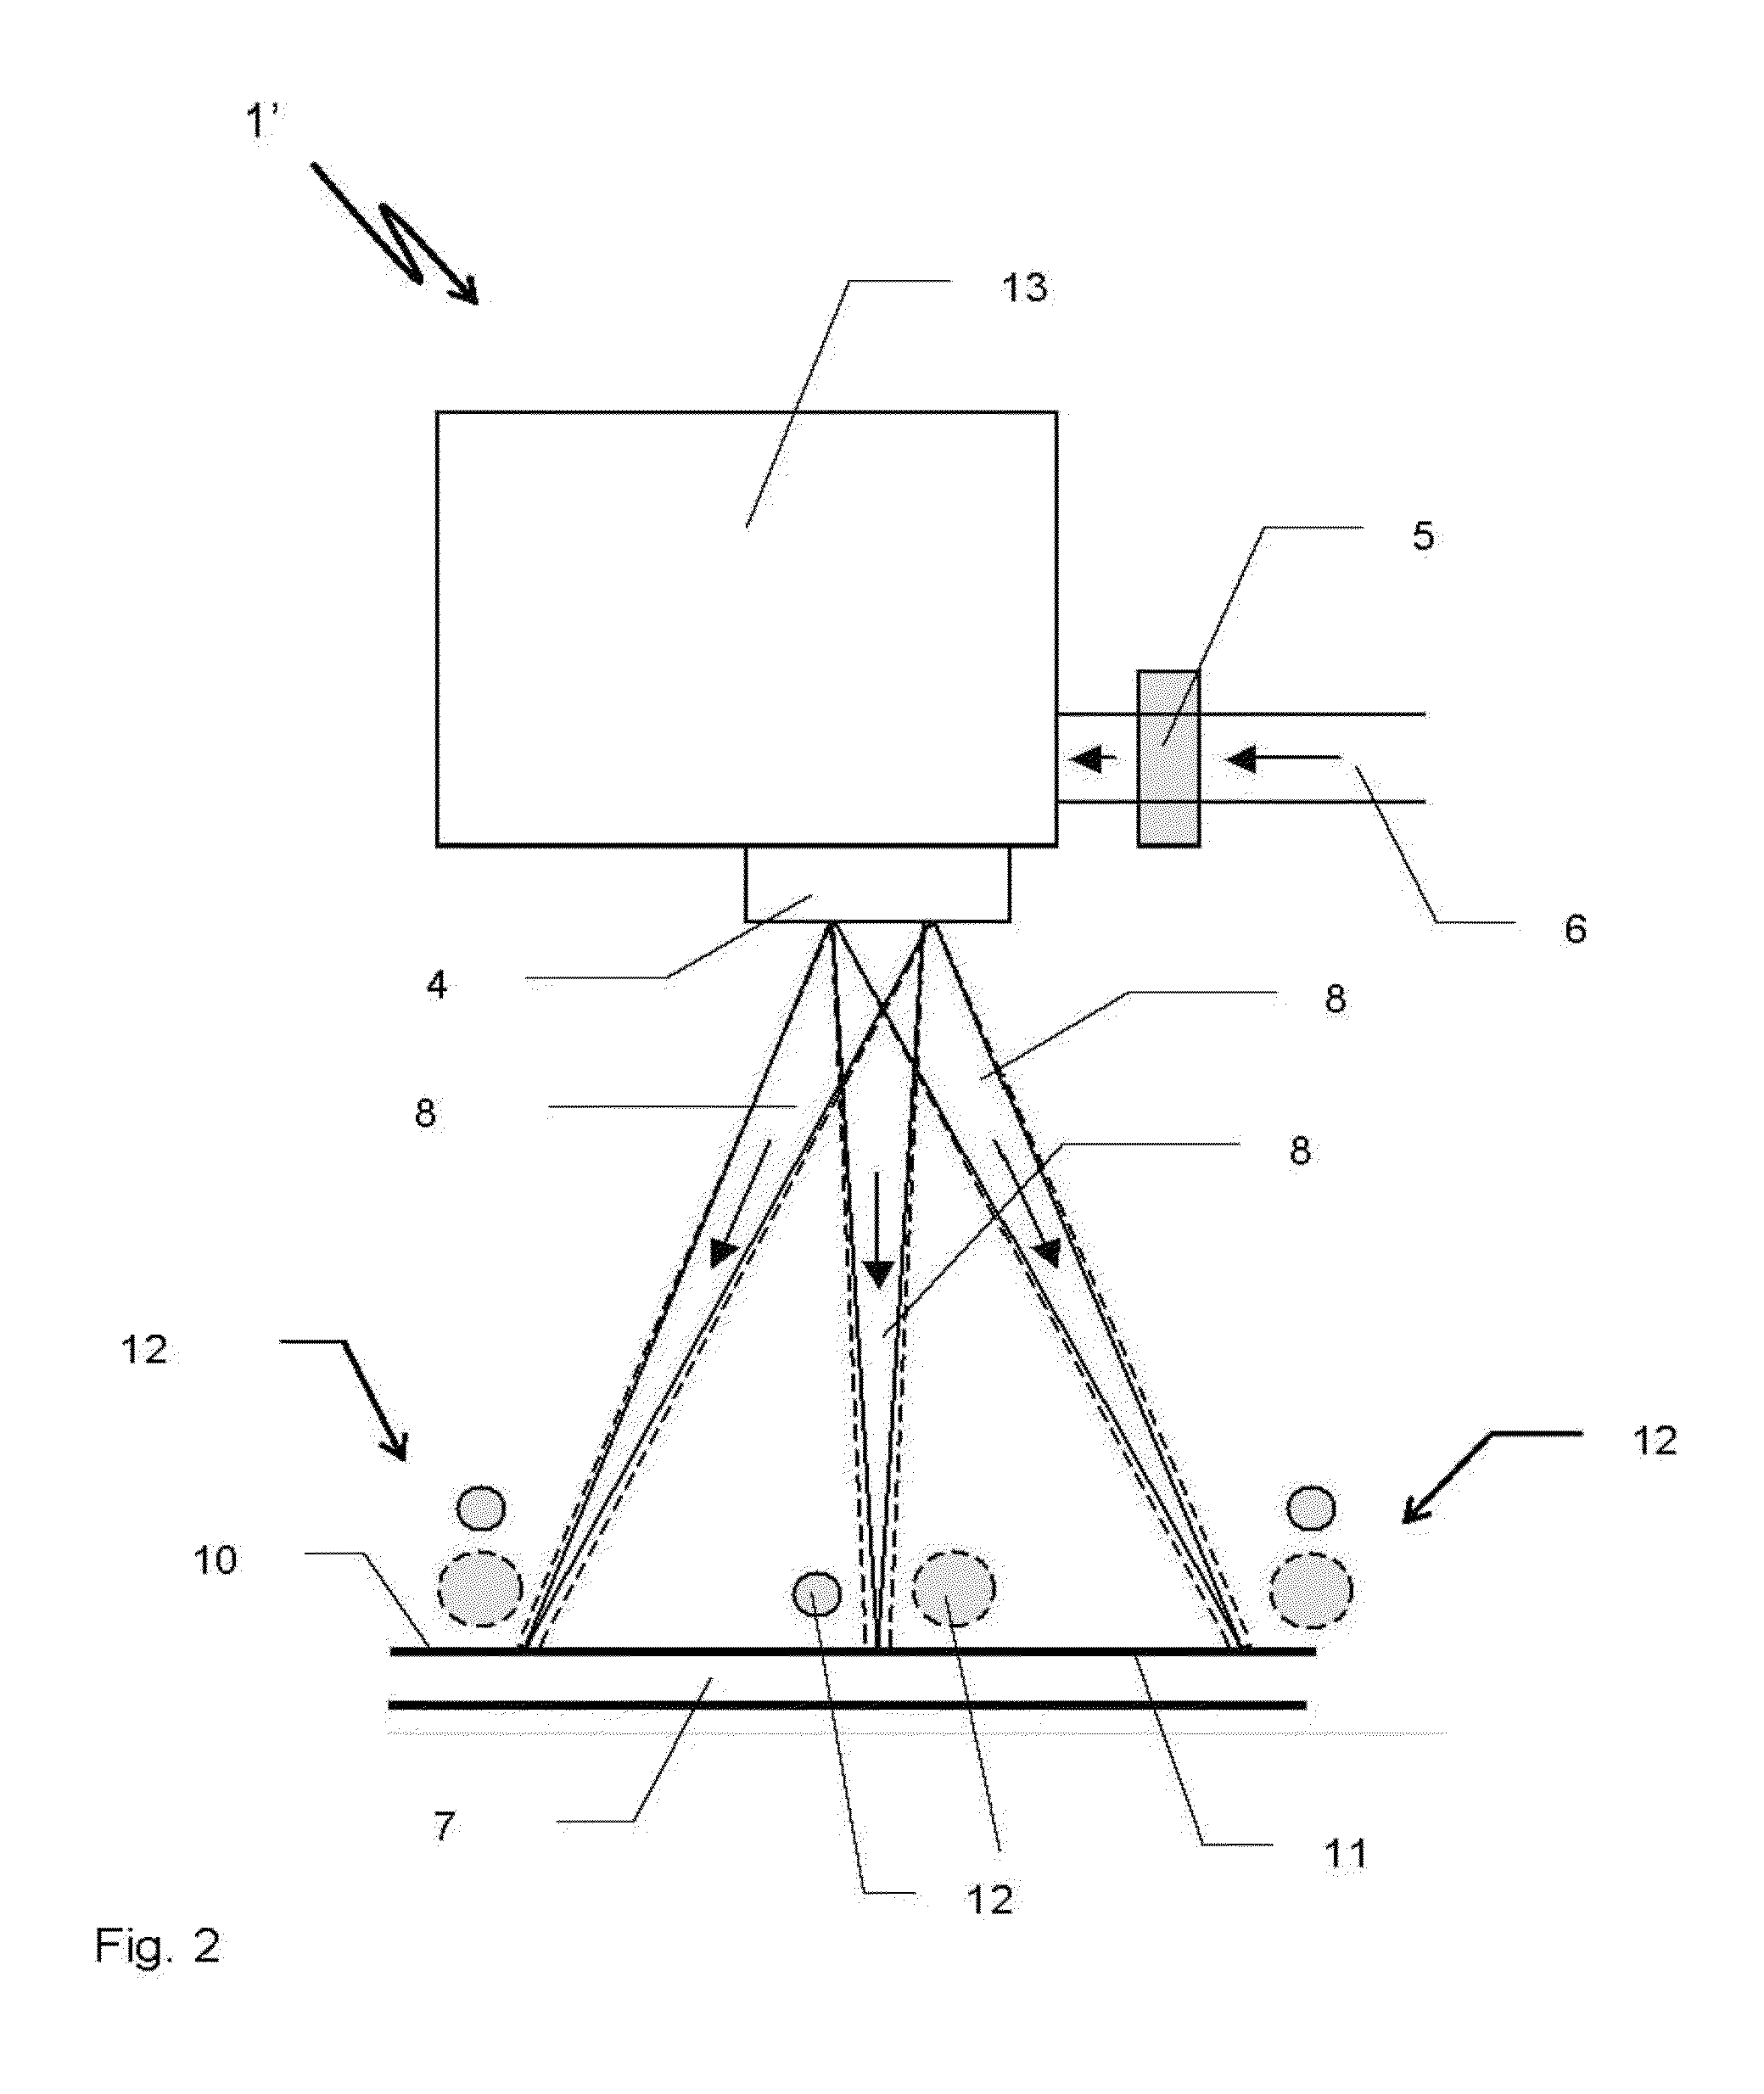 Process for the adjustment of a laser light spot for the laser processing of work pieces and a laser device for the performance of the process